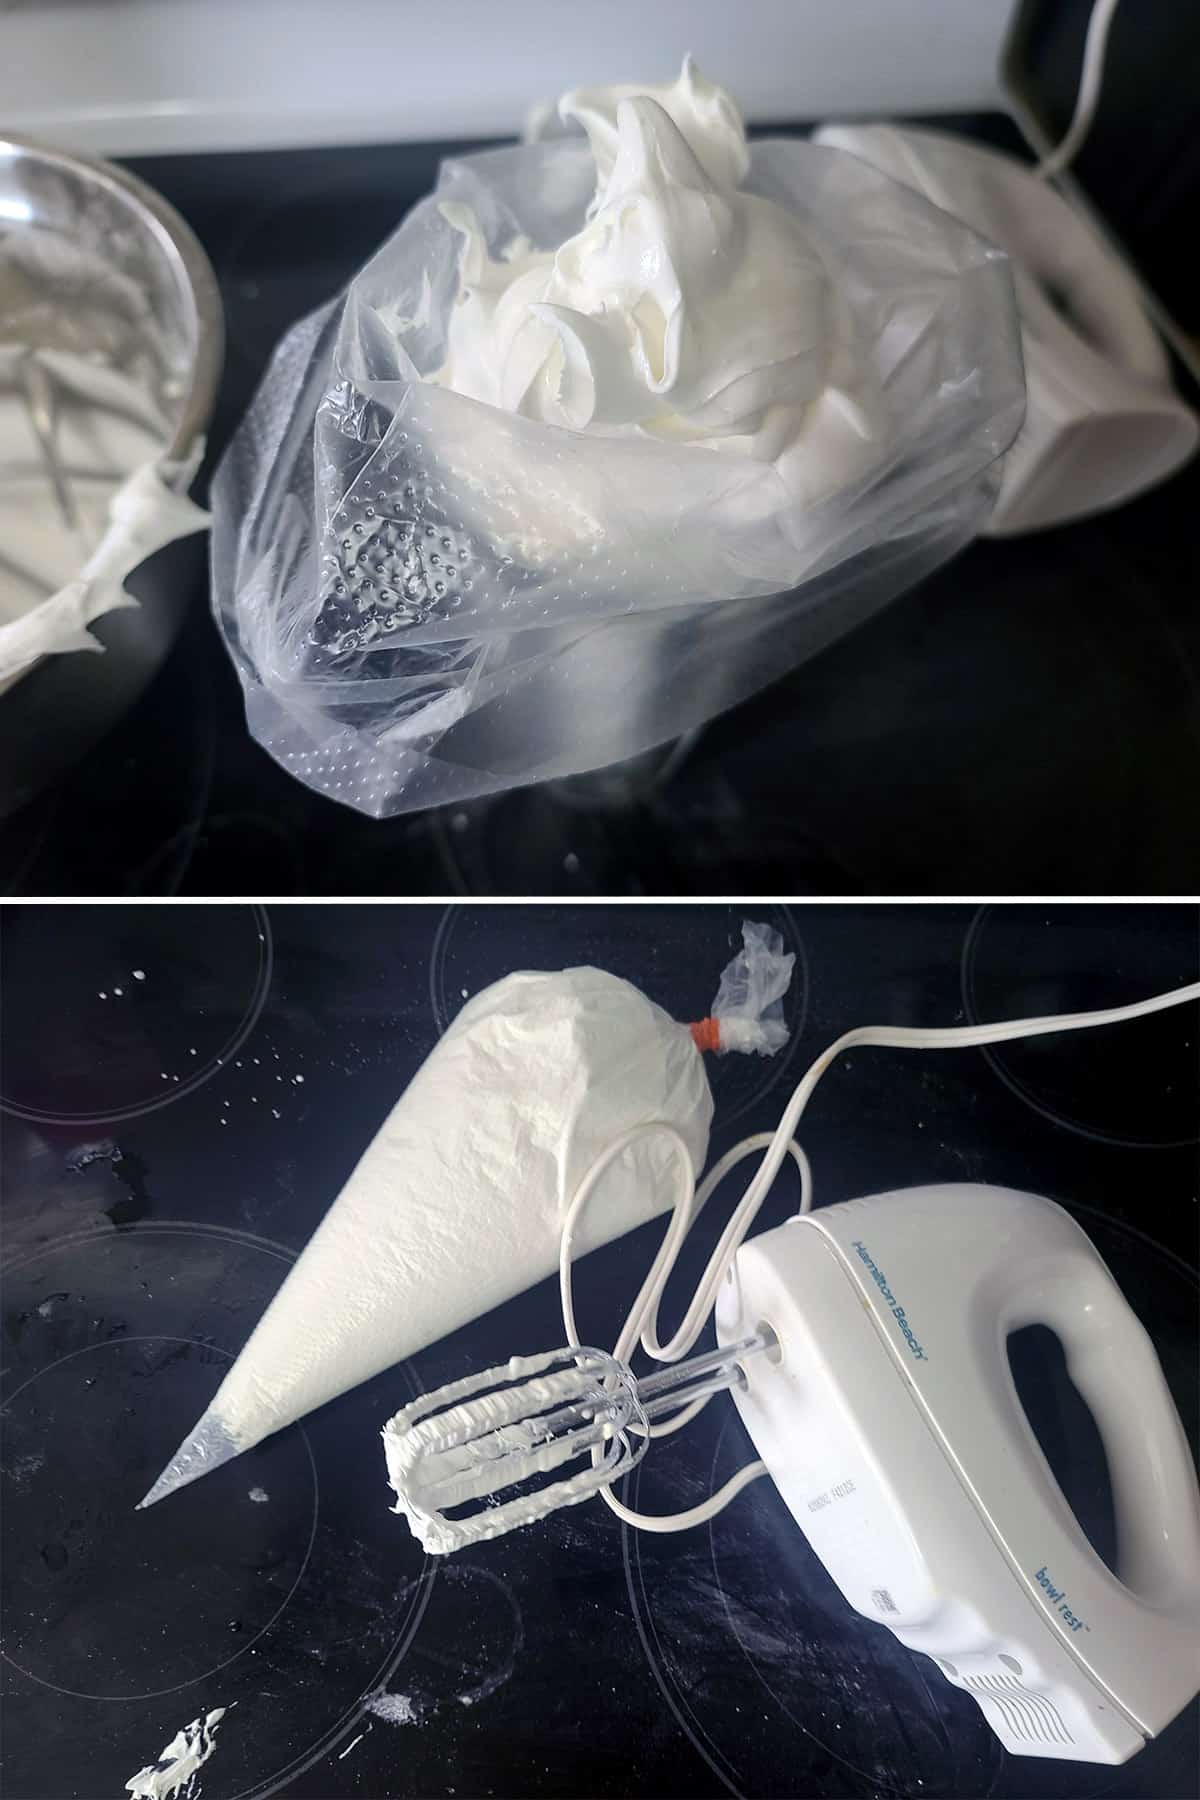 A 2 part image showing meringue powder royal icing being transferred to a pastry bag.